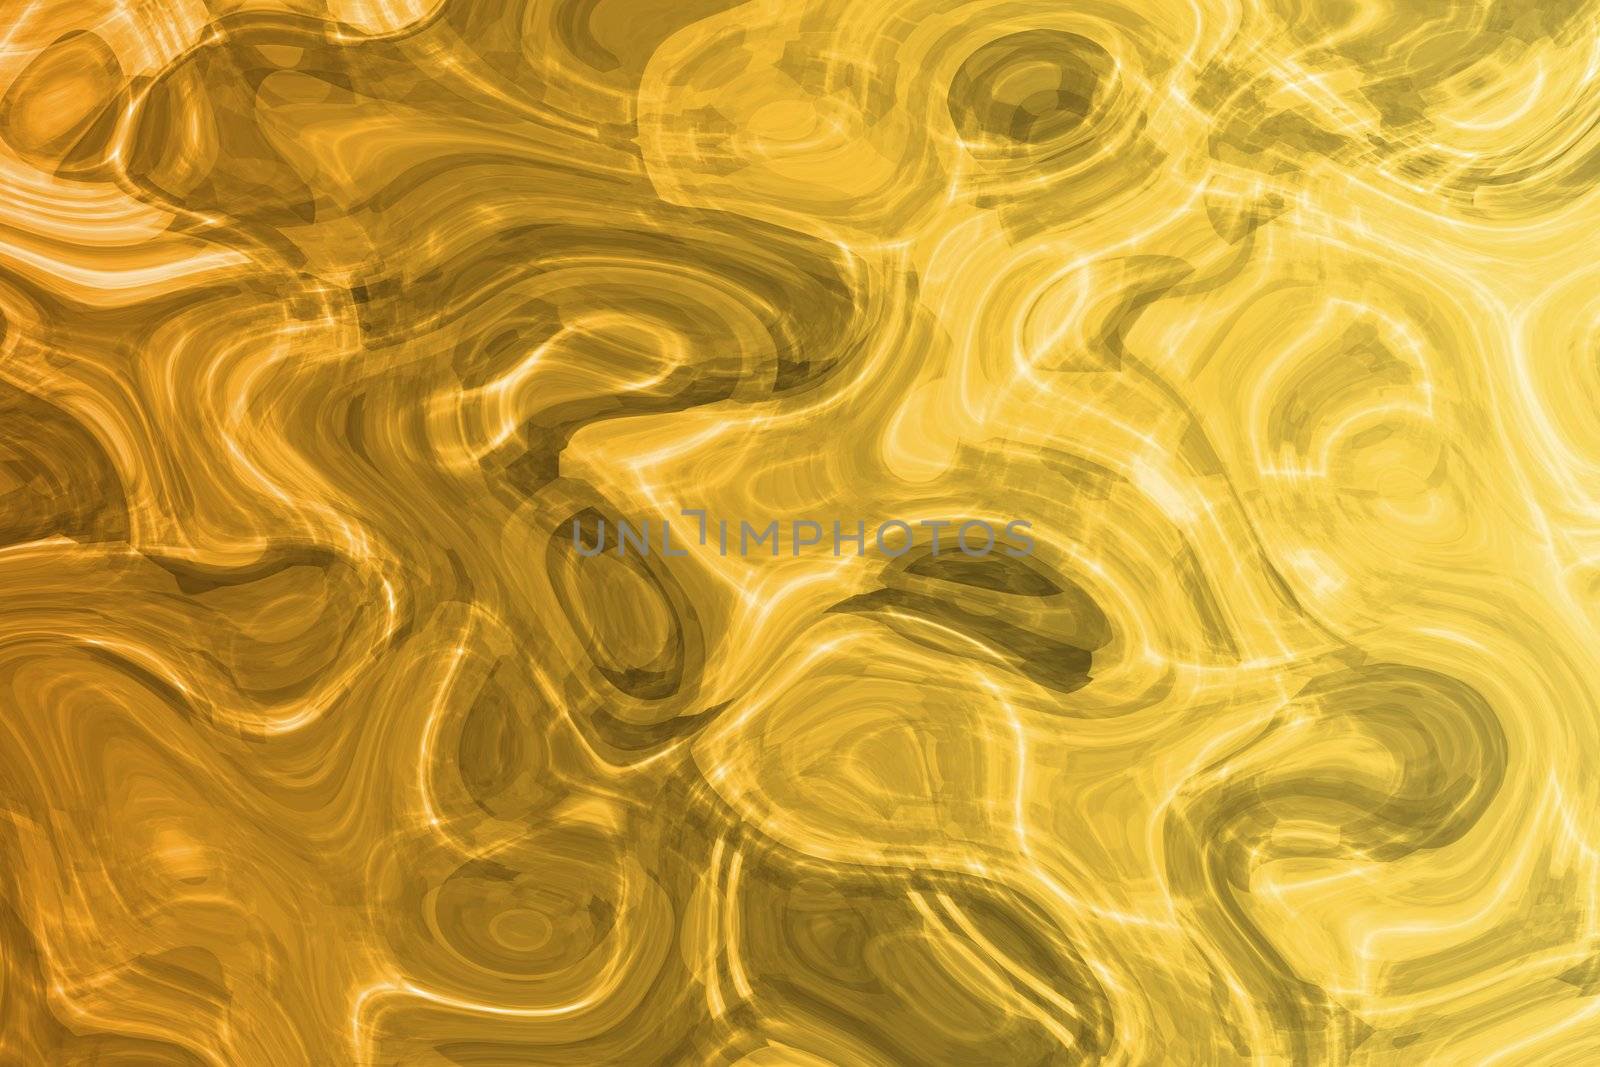 Alien Soothing Liquid Metal Water Abstract Background